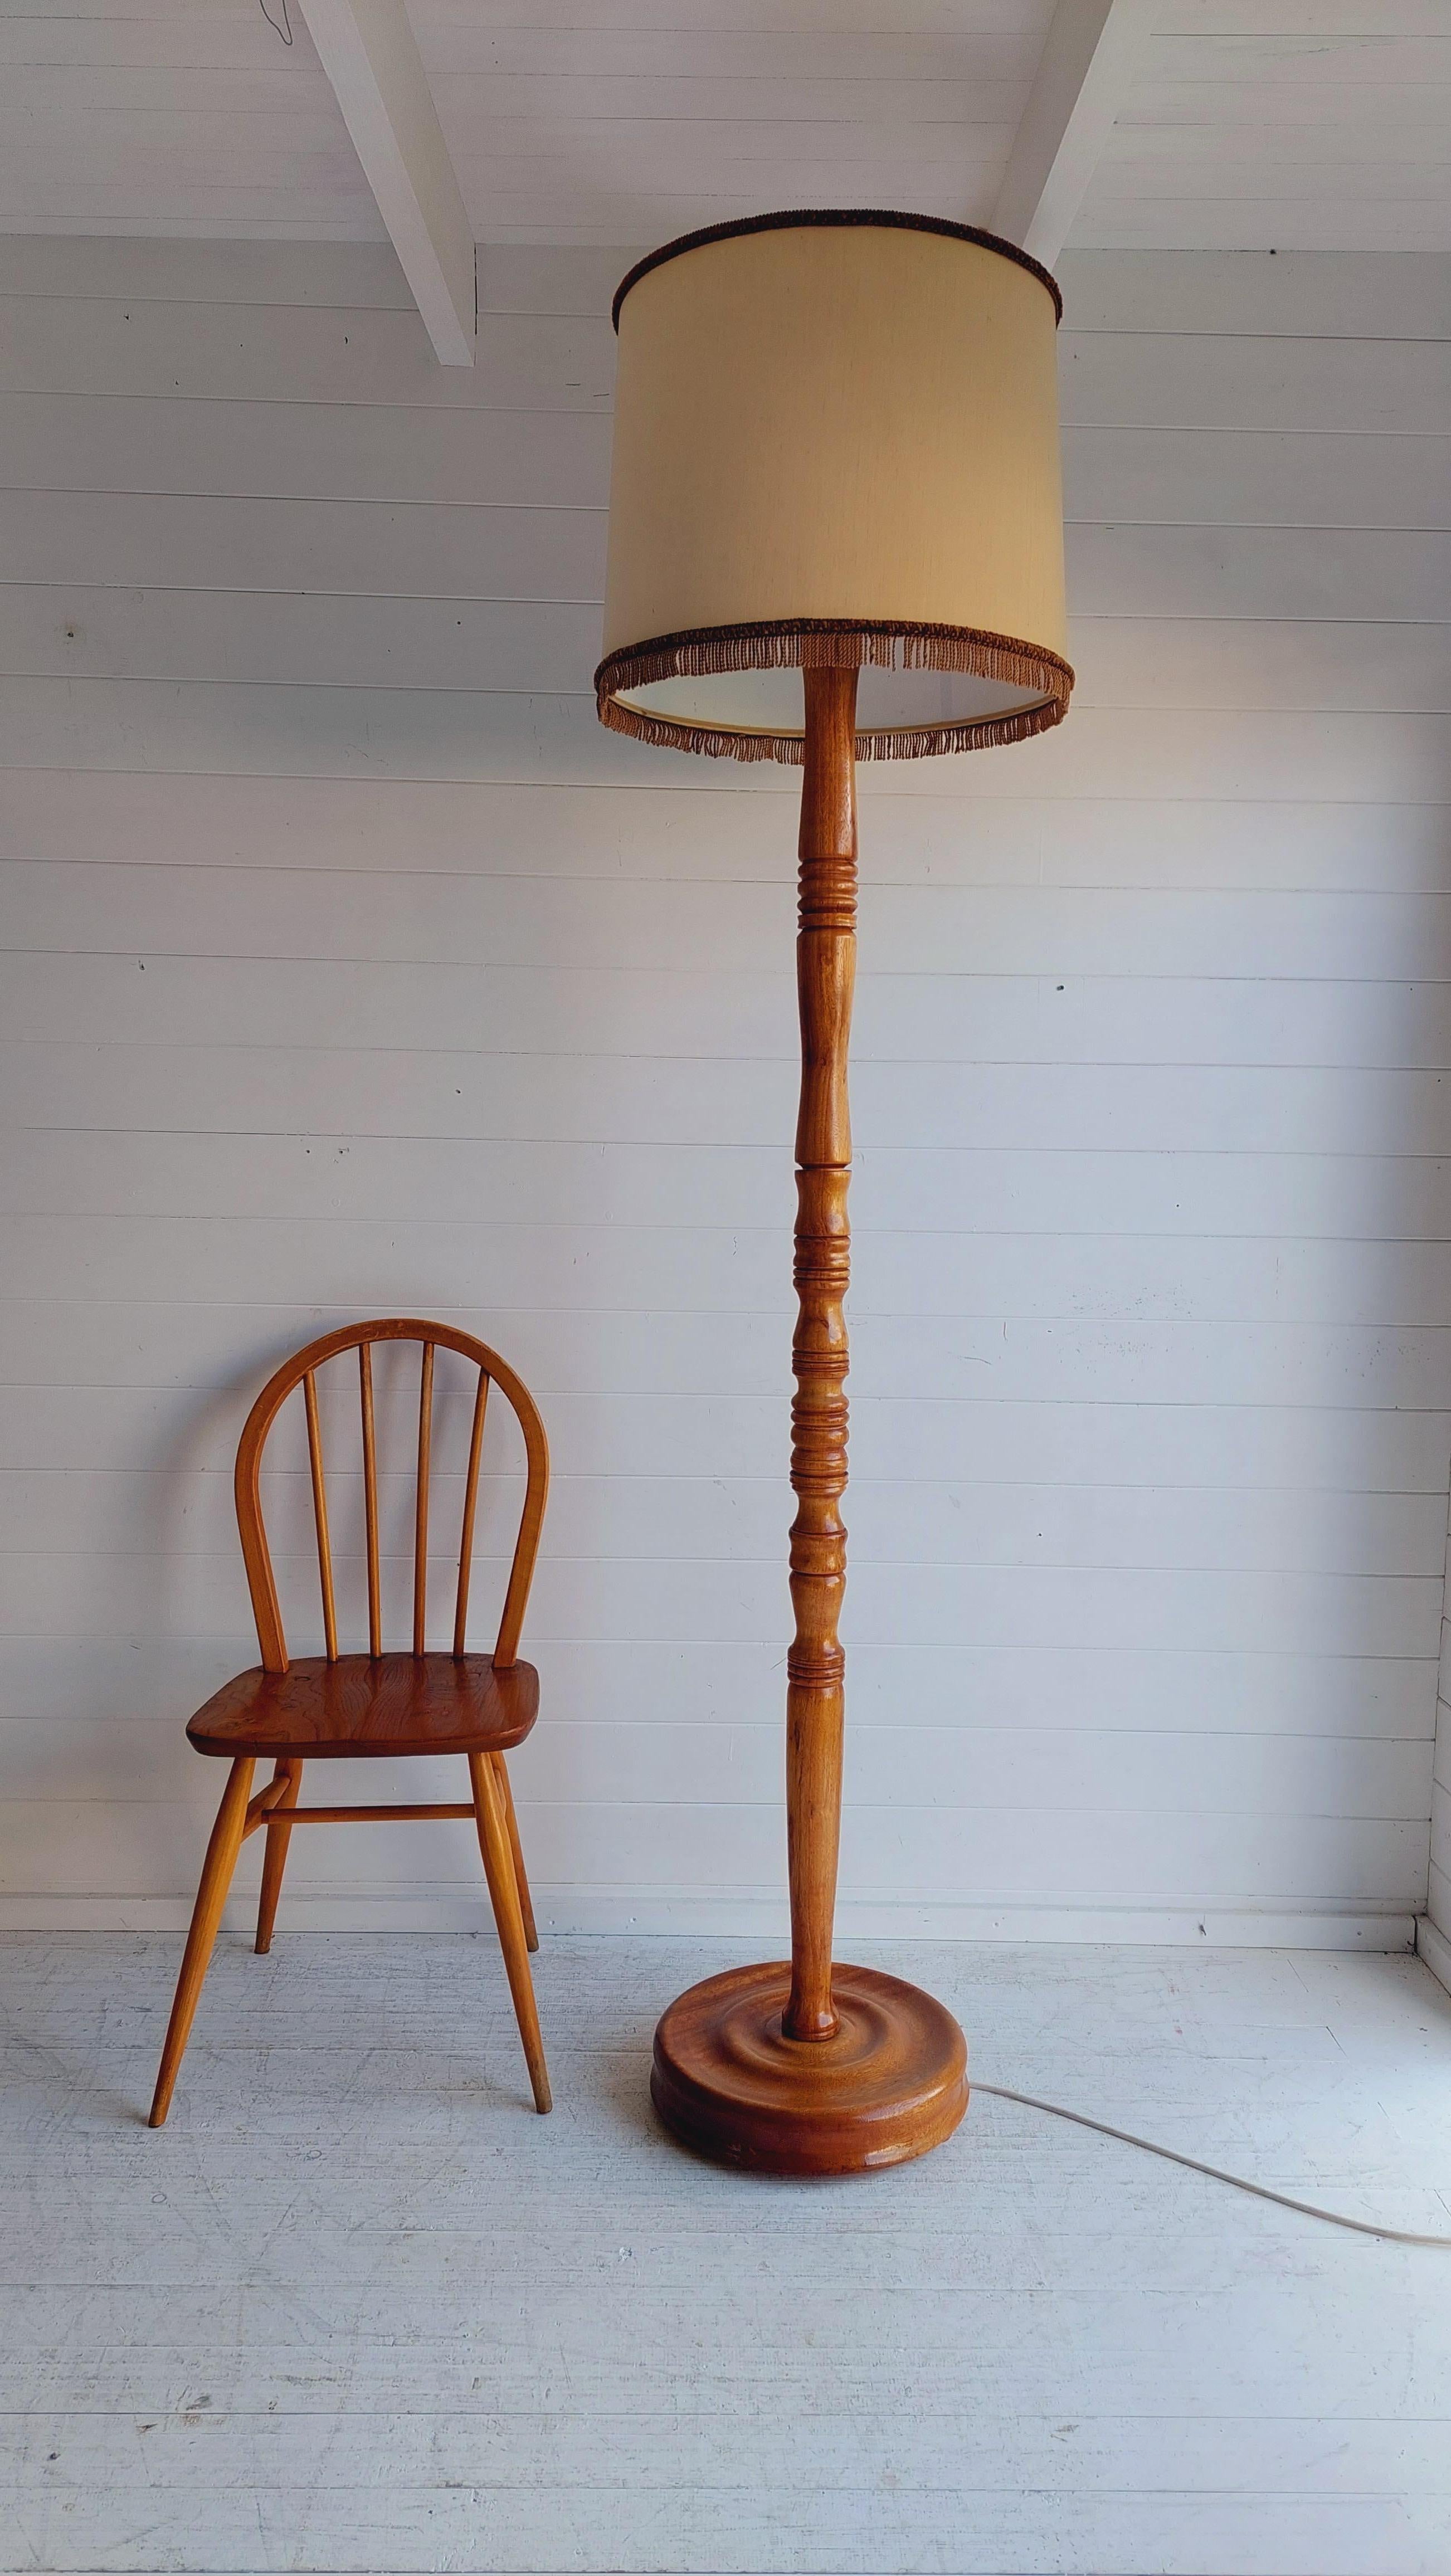 Lovely quality old Antique Wooden Floor / Standard Lamp. 2m tall
We are delighted to offer for sale this Stunning Antique Circa 1920's Oak Wooden Floor Lamp.

A large British oak floor lamp with stylish turned detail. 
Made most probably in the